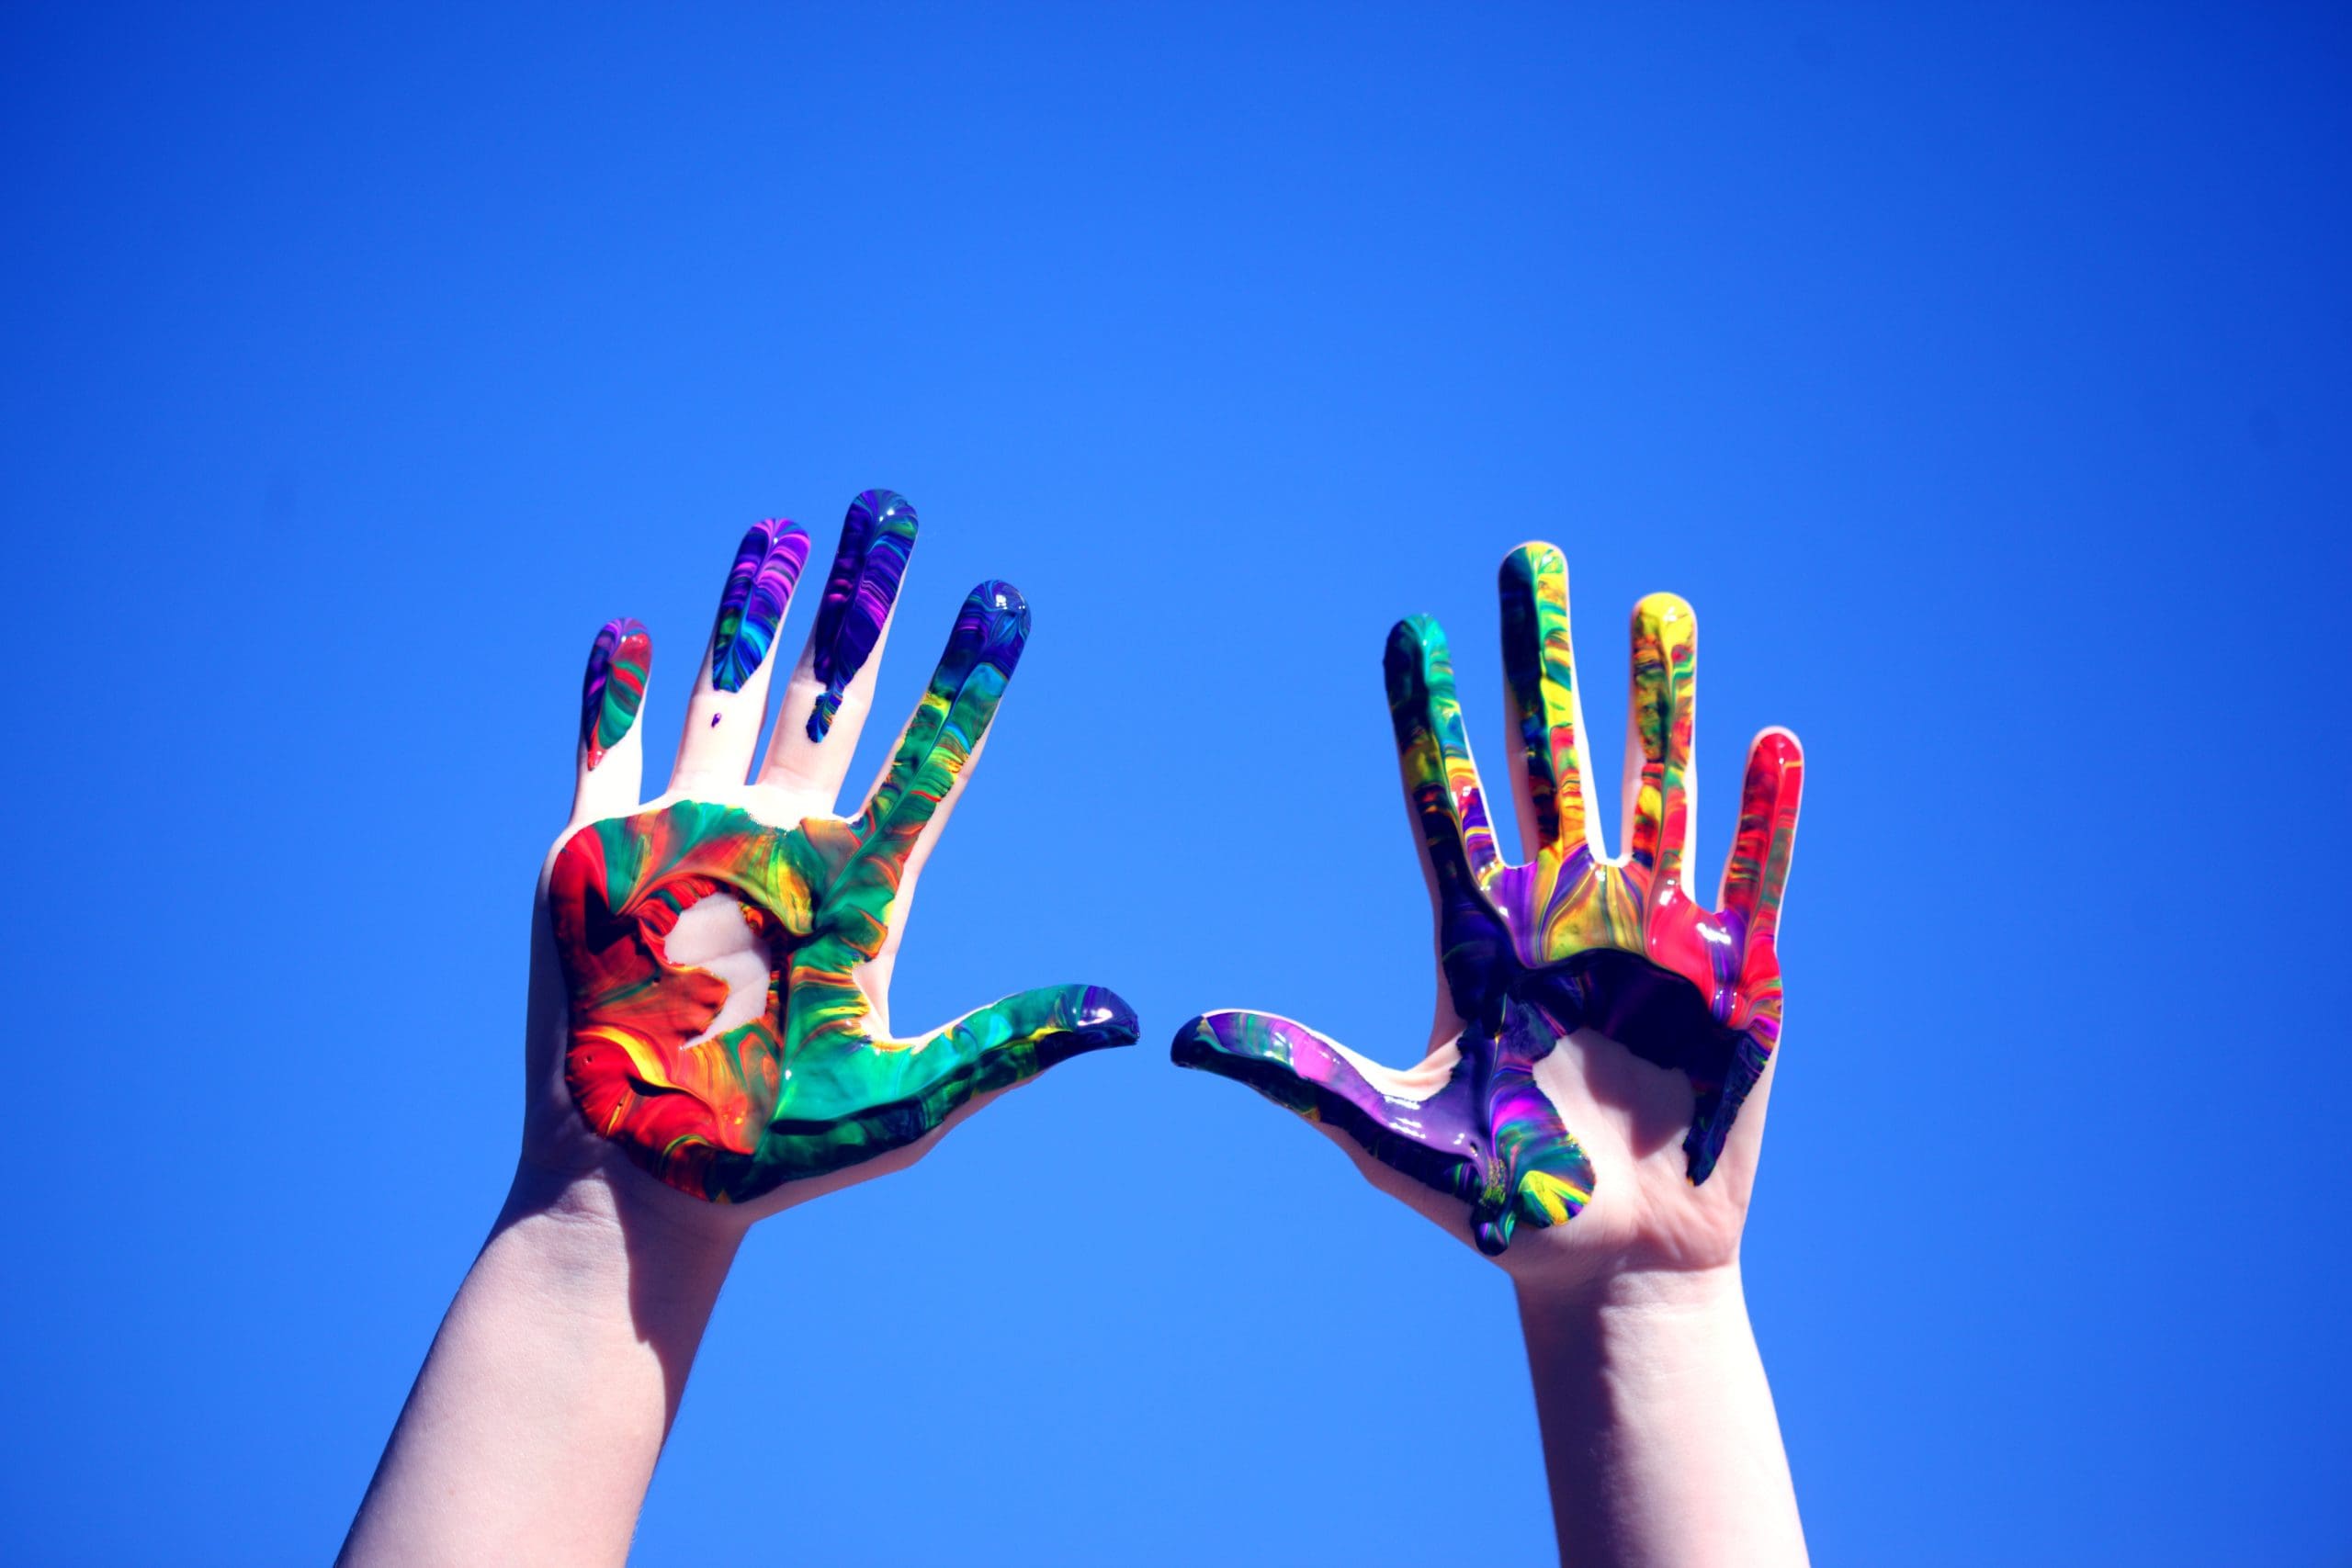 Two hands painted with colors are raised against a blue sky.